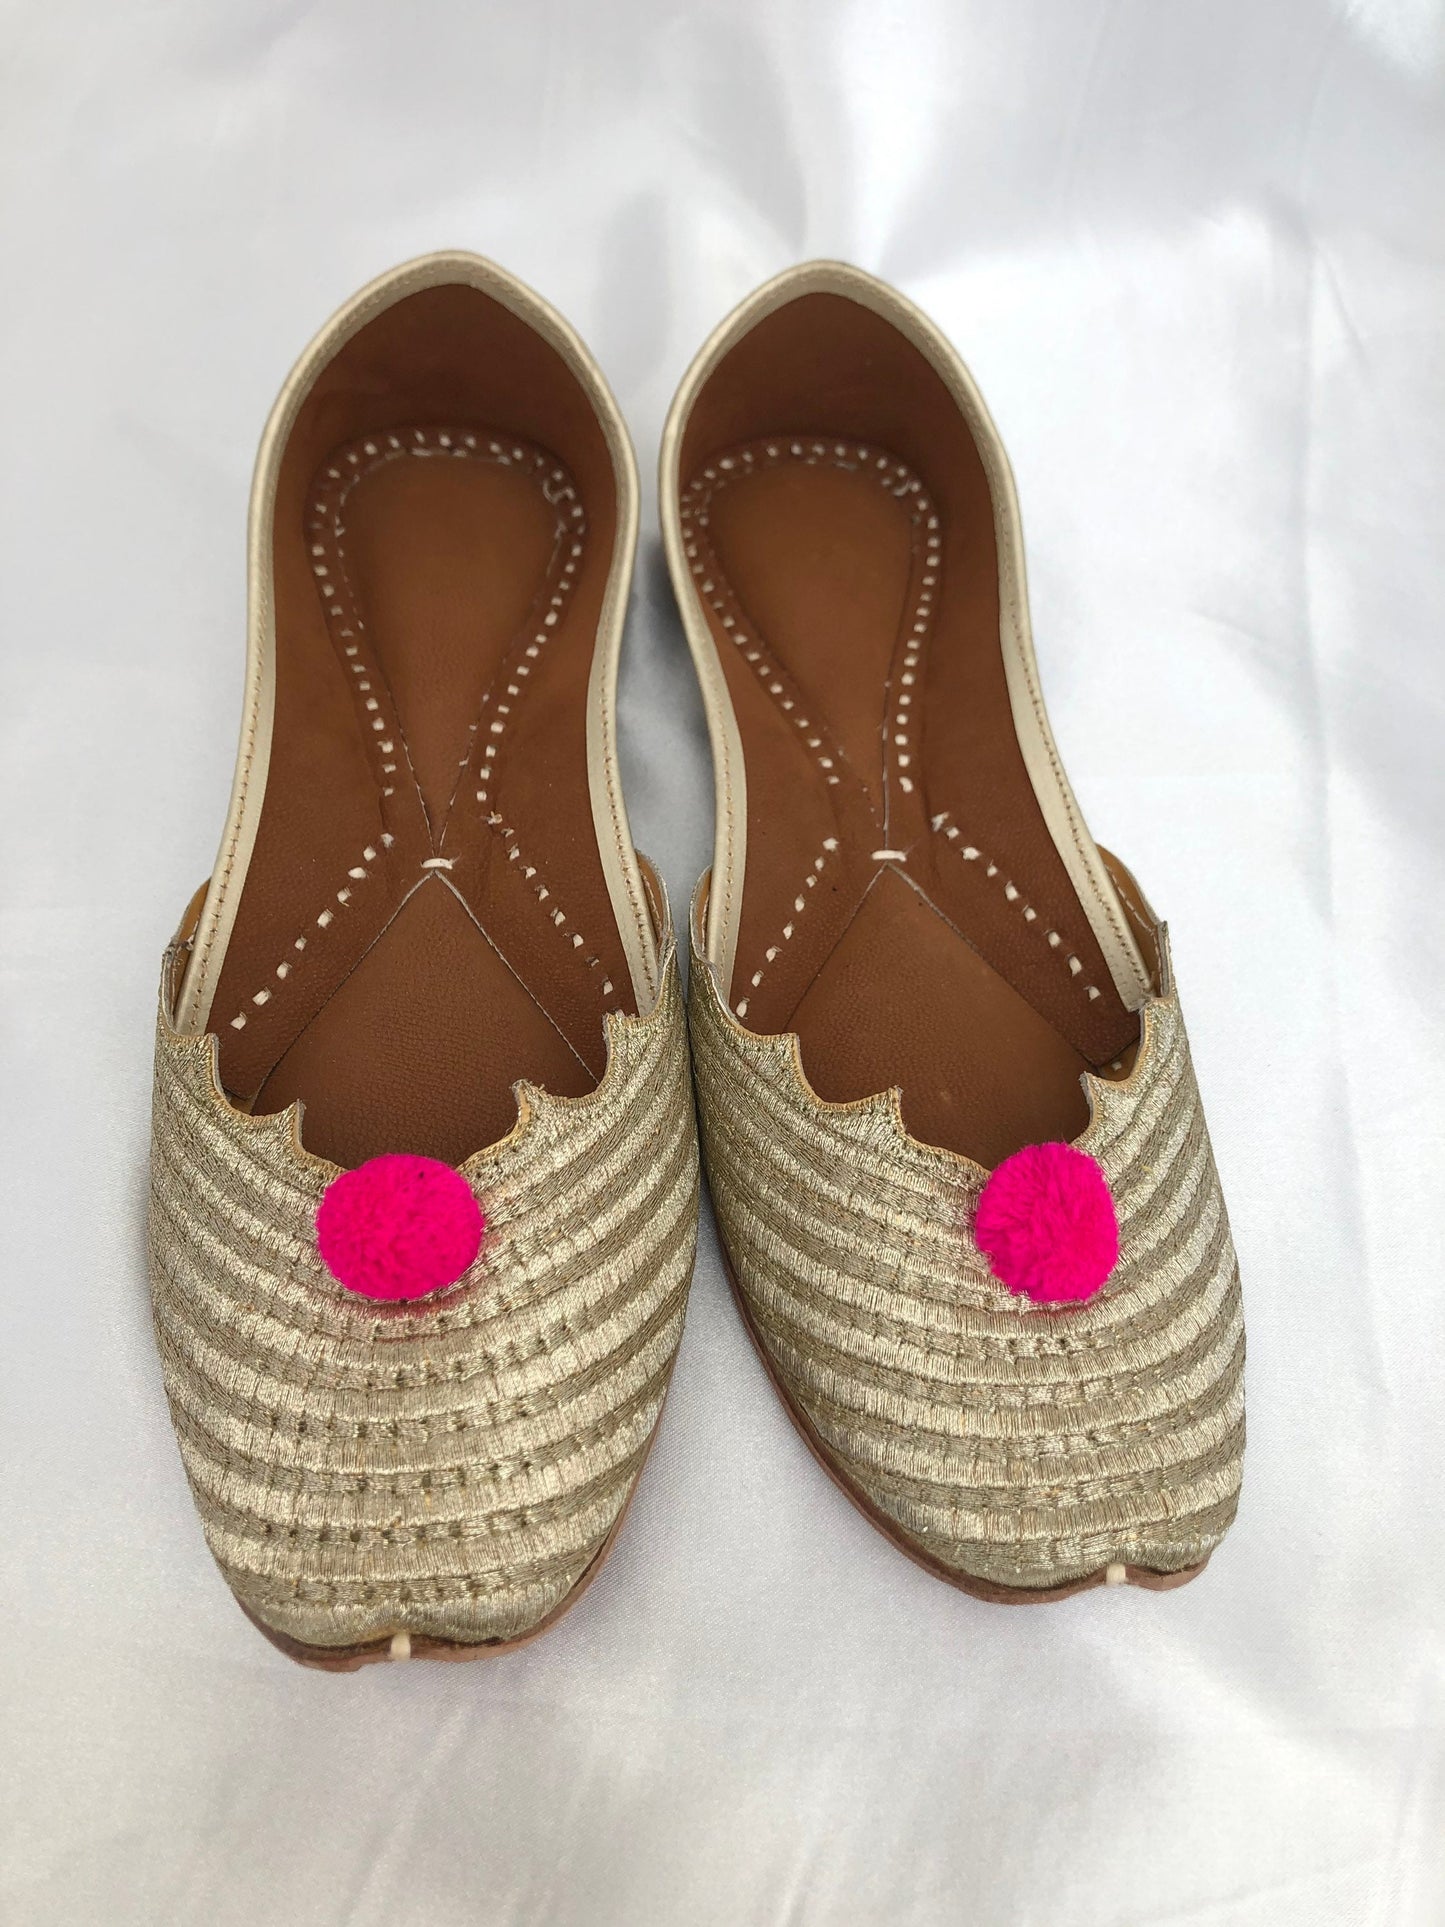 Punjabi Jutti / Jooti with Hot Pink Pom Pom and All over embroidered Bride’s Woman Shoes US Size 5,6 UK 3,4